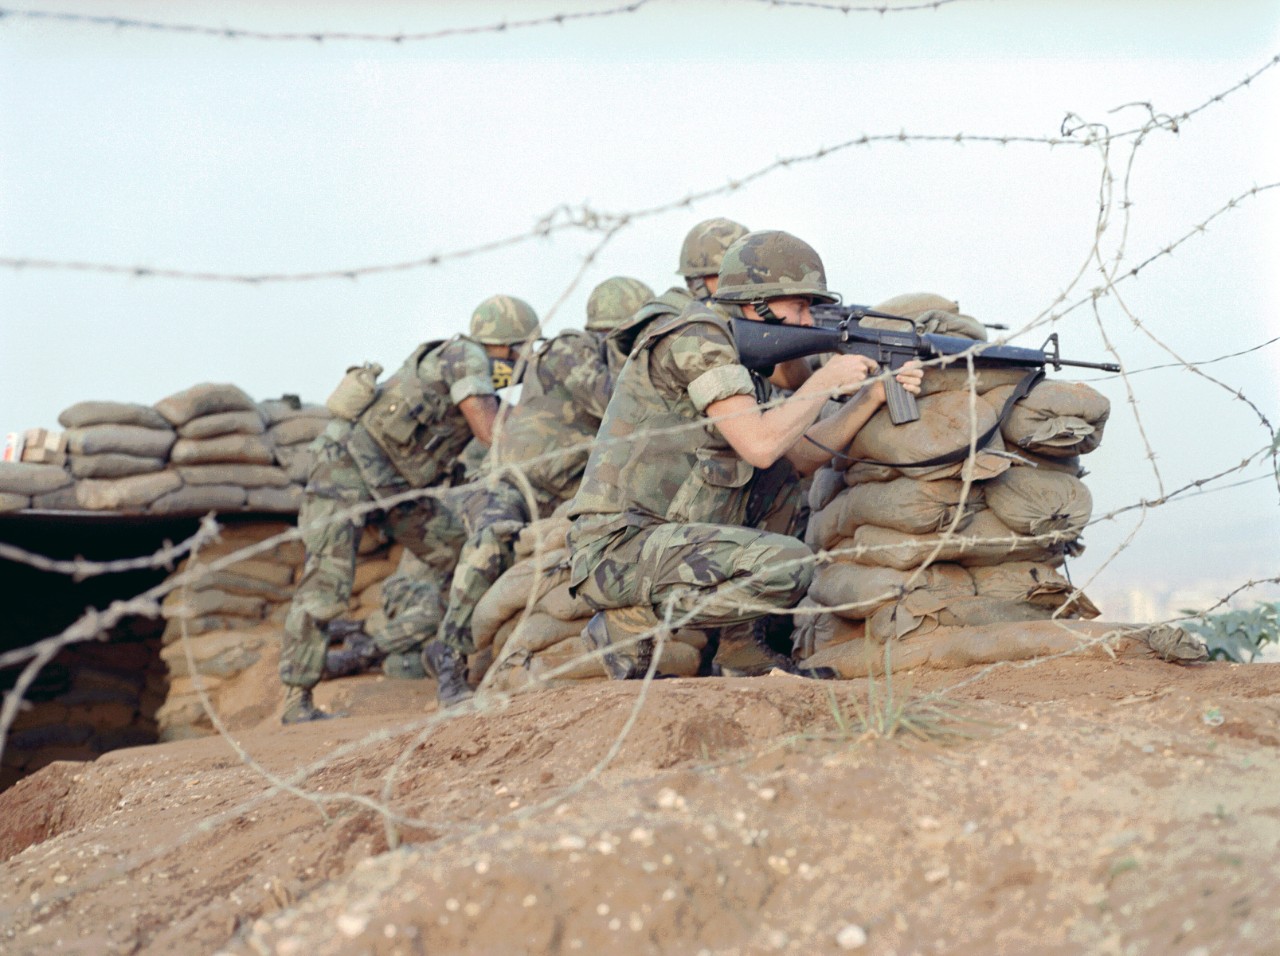 U.S. Marines armed with M16 rifles